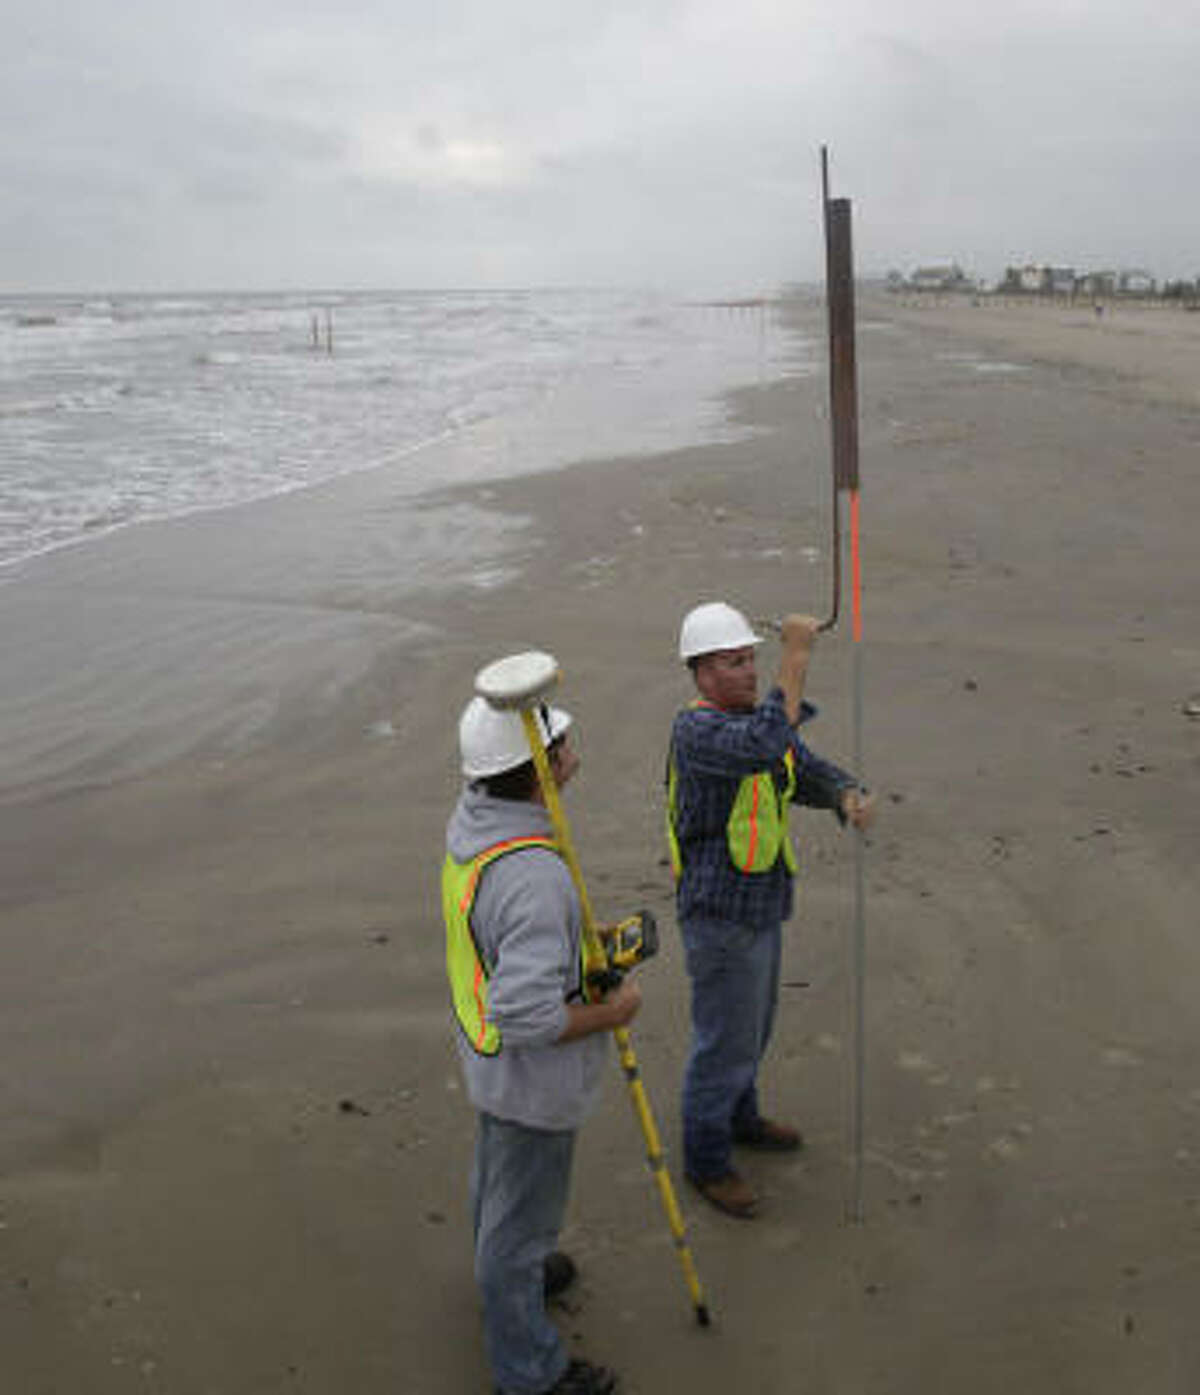 Matt Radosz, left, and Joni Hershberger, both of Weeks Marine, a contractor hired by the General Land Office, put down markers along the beach on Galveston Island.